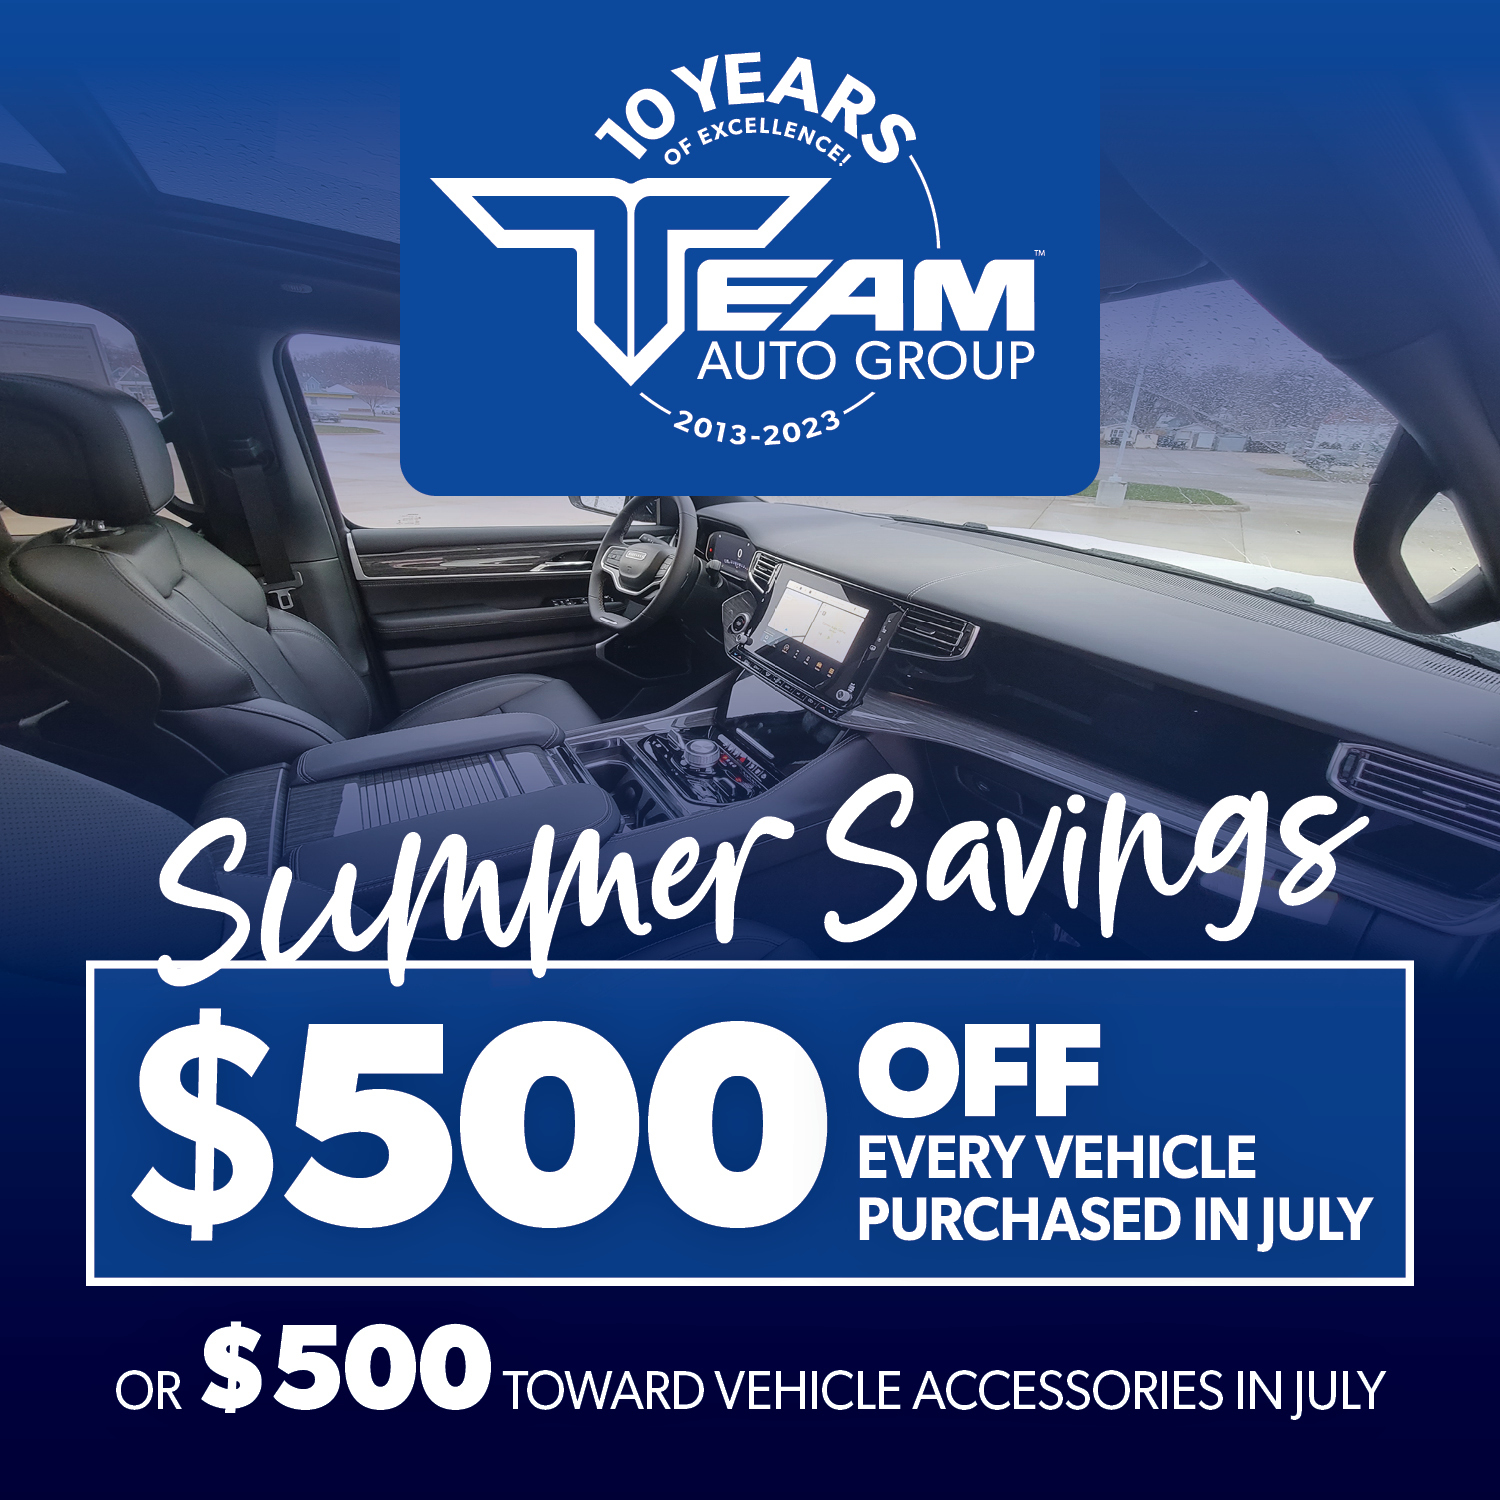 Denison, Iowa Dealership Offering $500 Off Any Vehicle Purchased In July